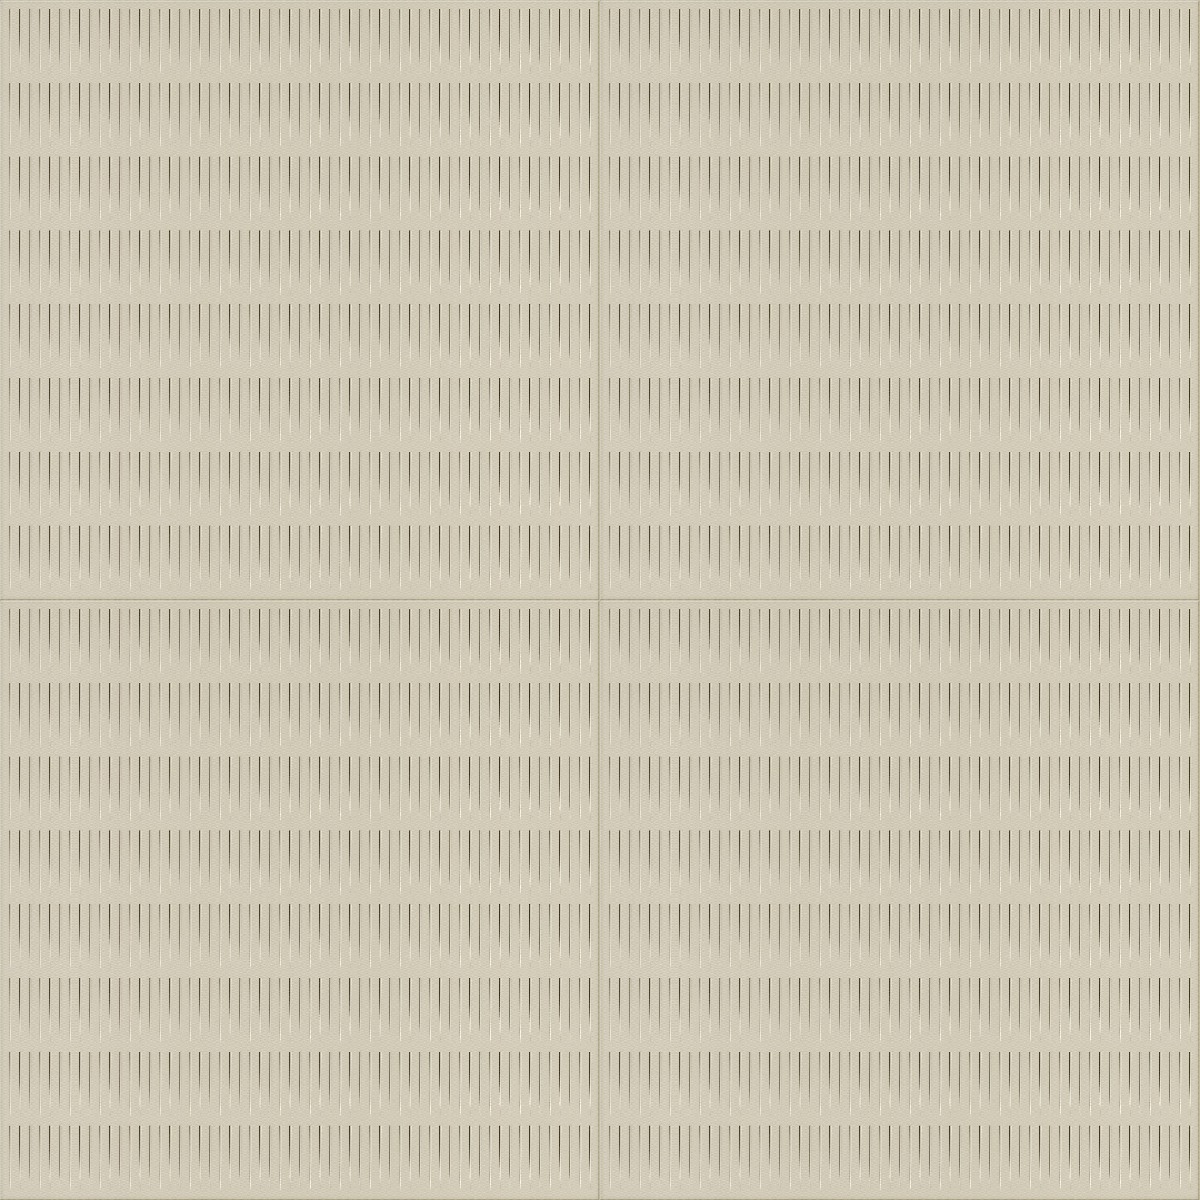 A seamless surfacing texture with h01r natural units arranged in a Stack pattern